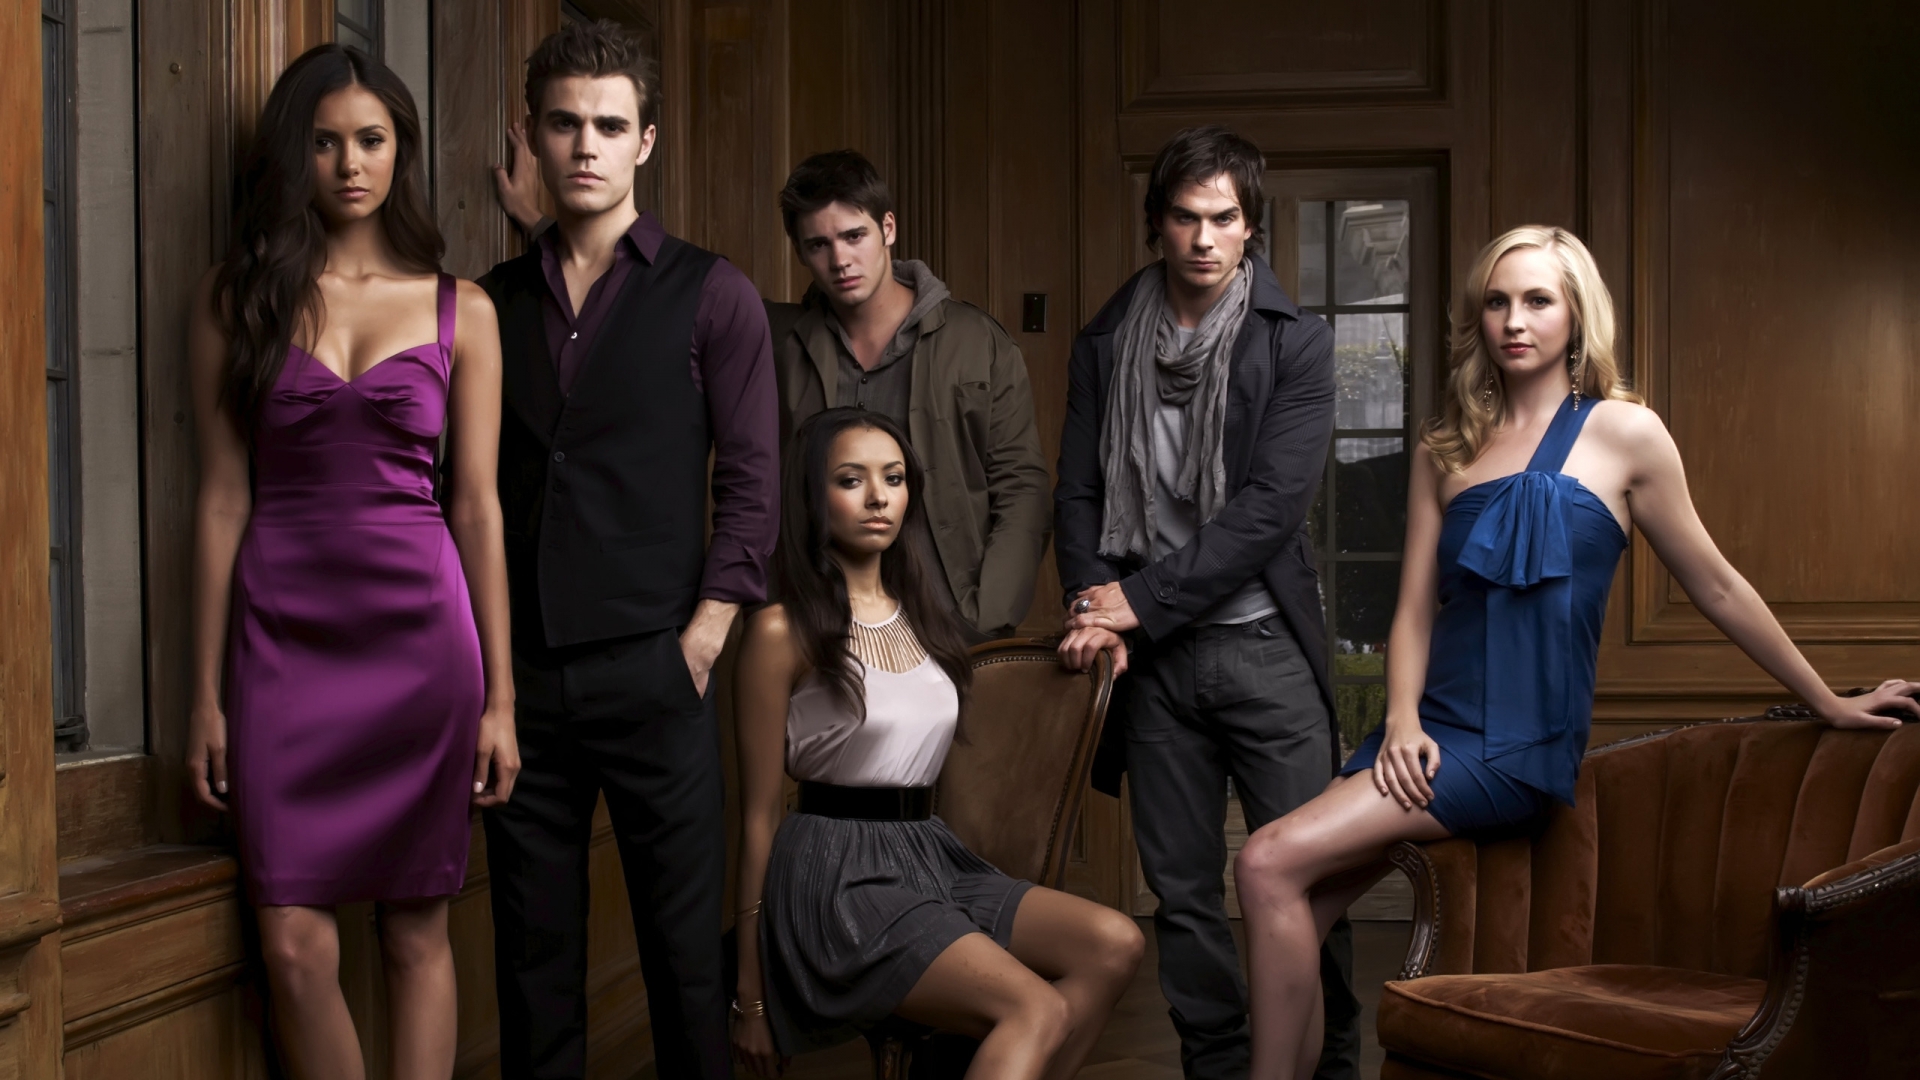 The Vampire Diaries Cast for 1920 x 1080 HDTV 1080p resolution